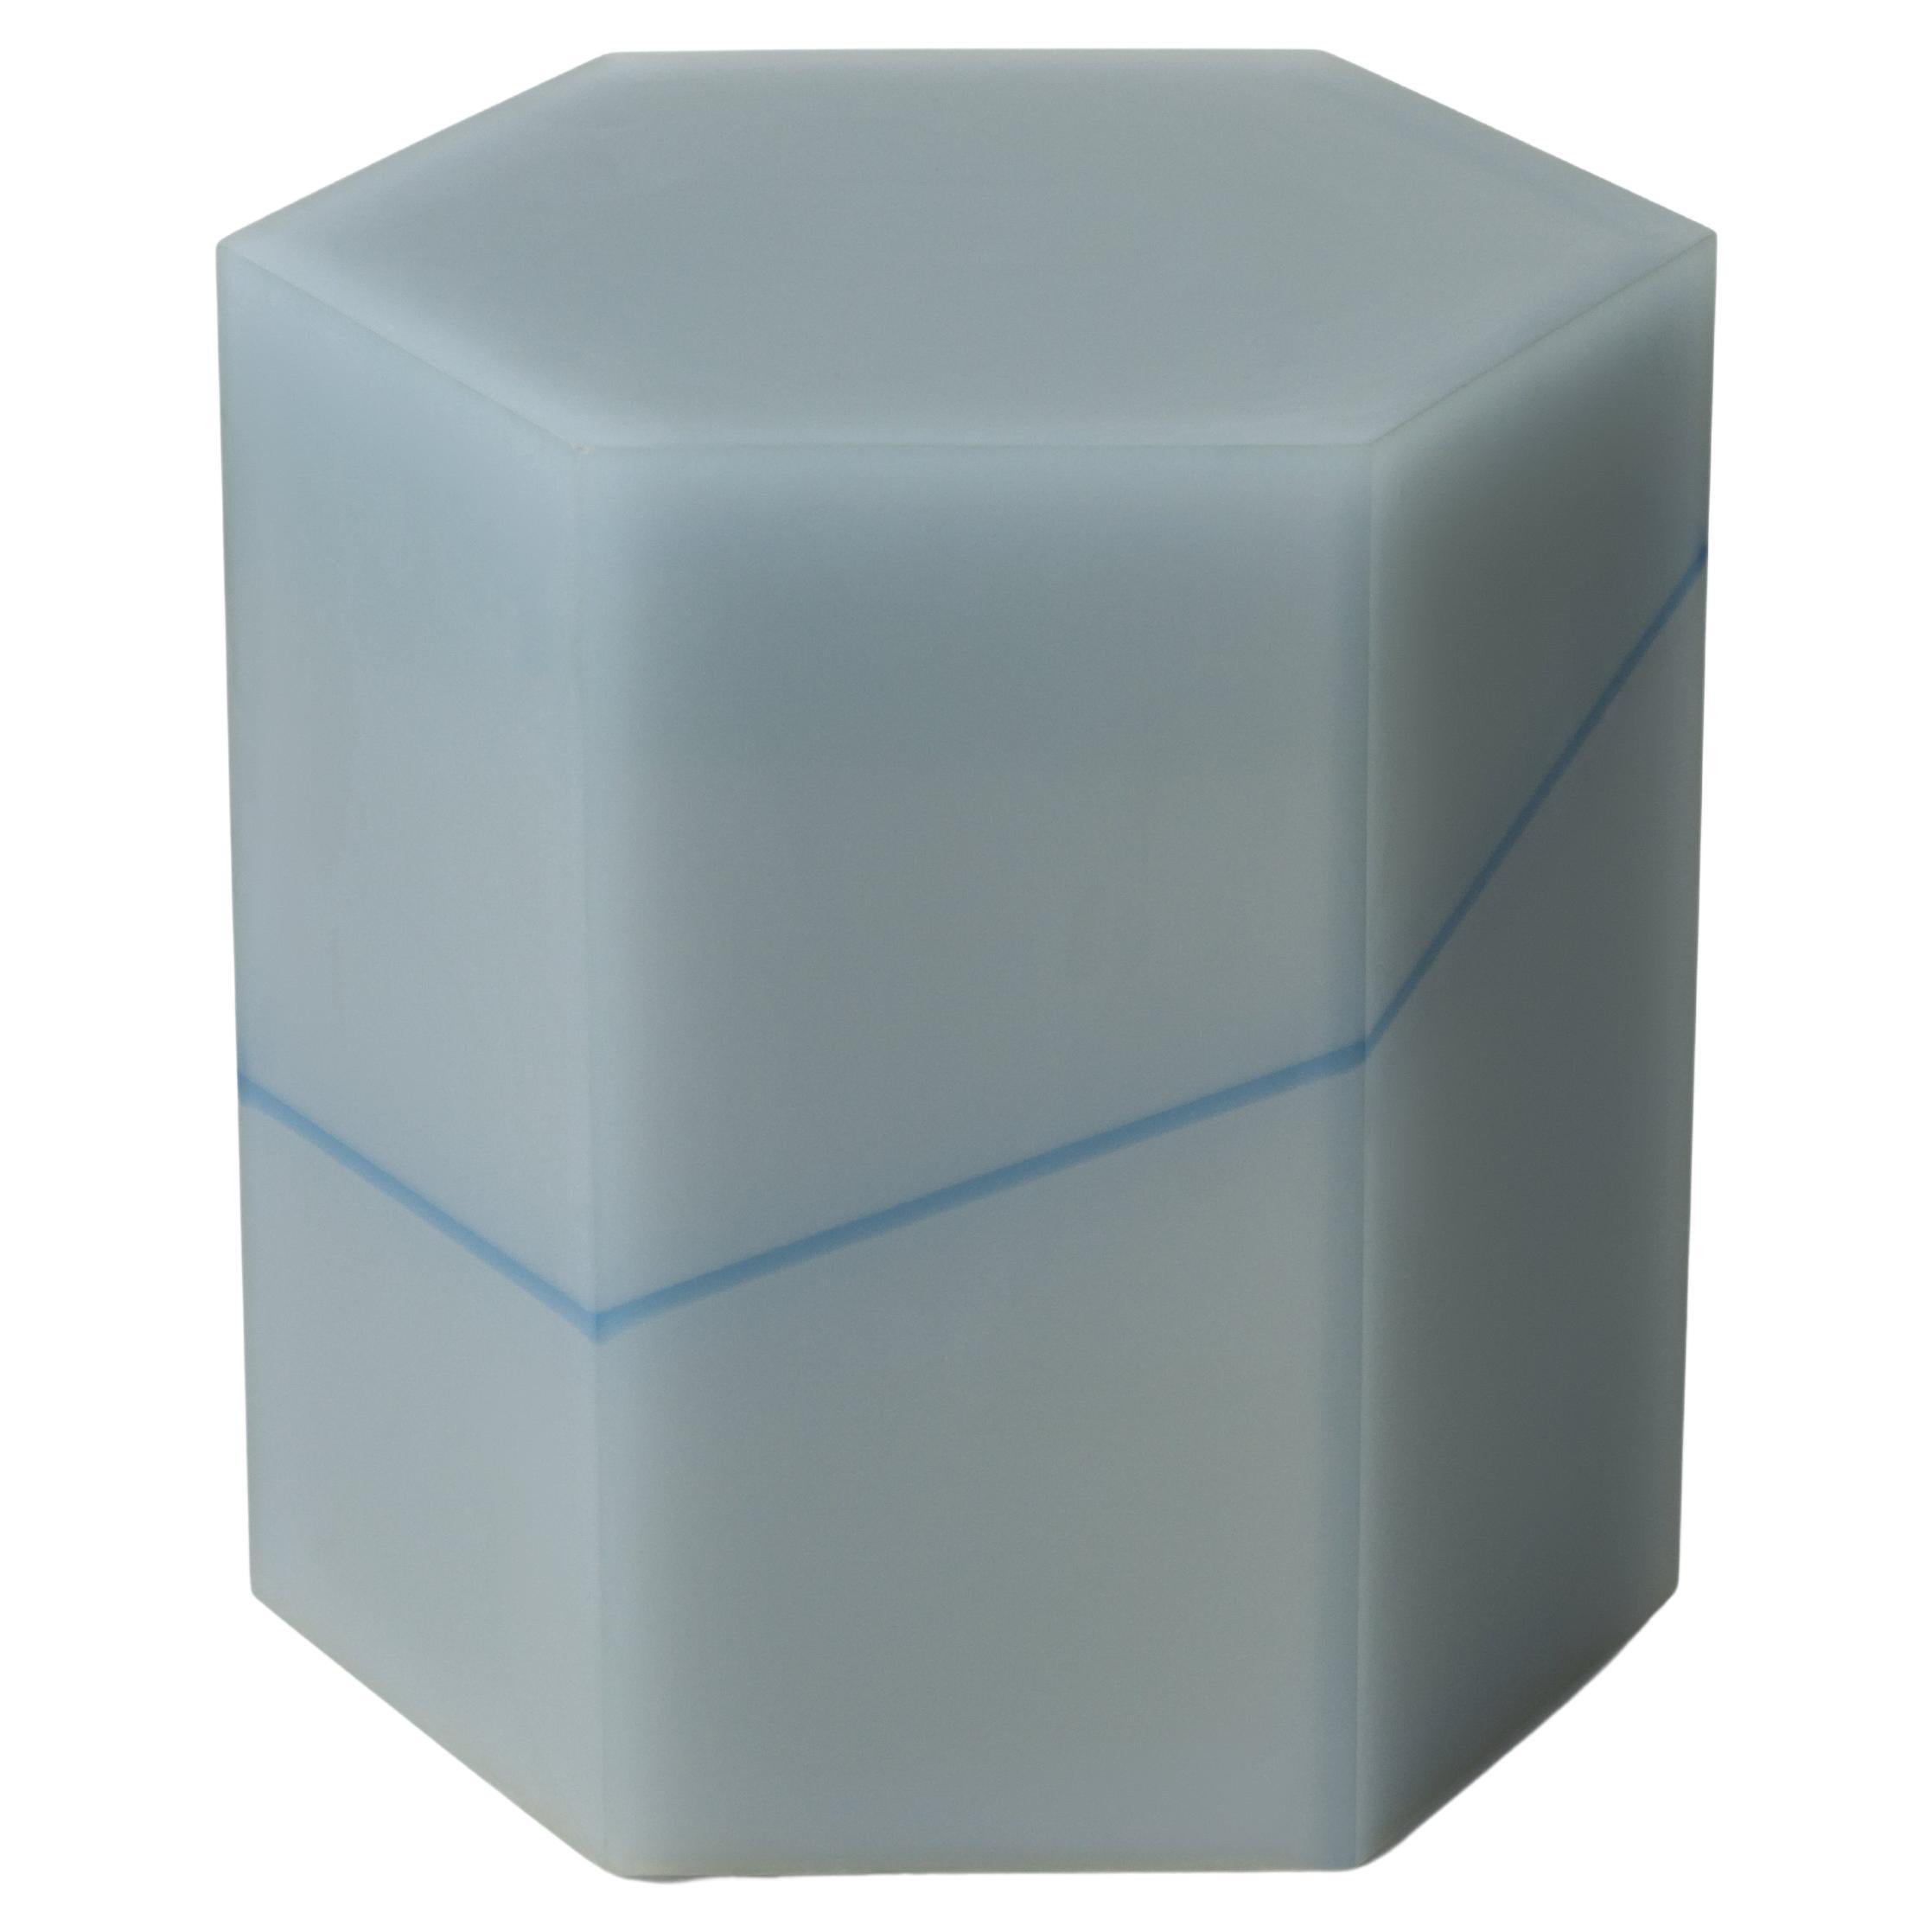 Blue Line Hex Box Resin Side Table/Stool Gray by Facture, REP by Tuleste Factory For Sale